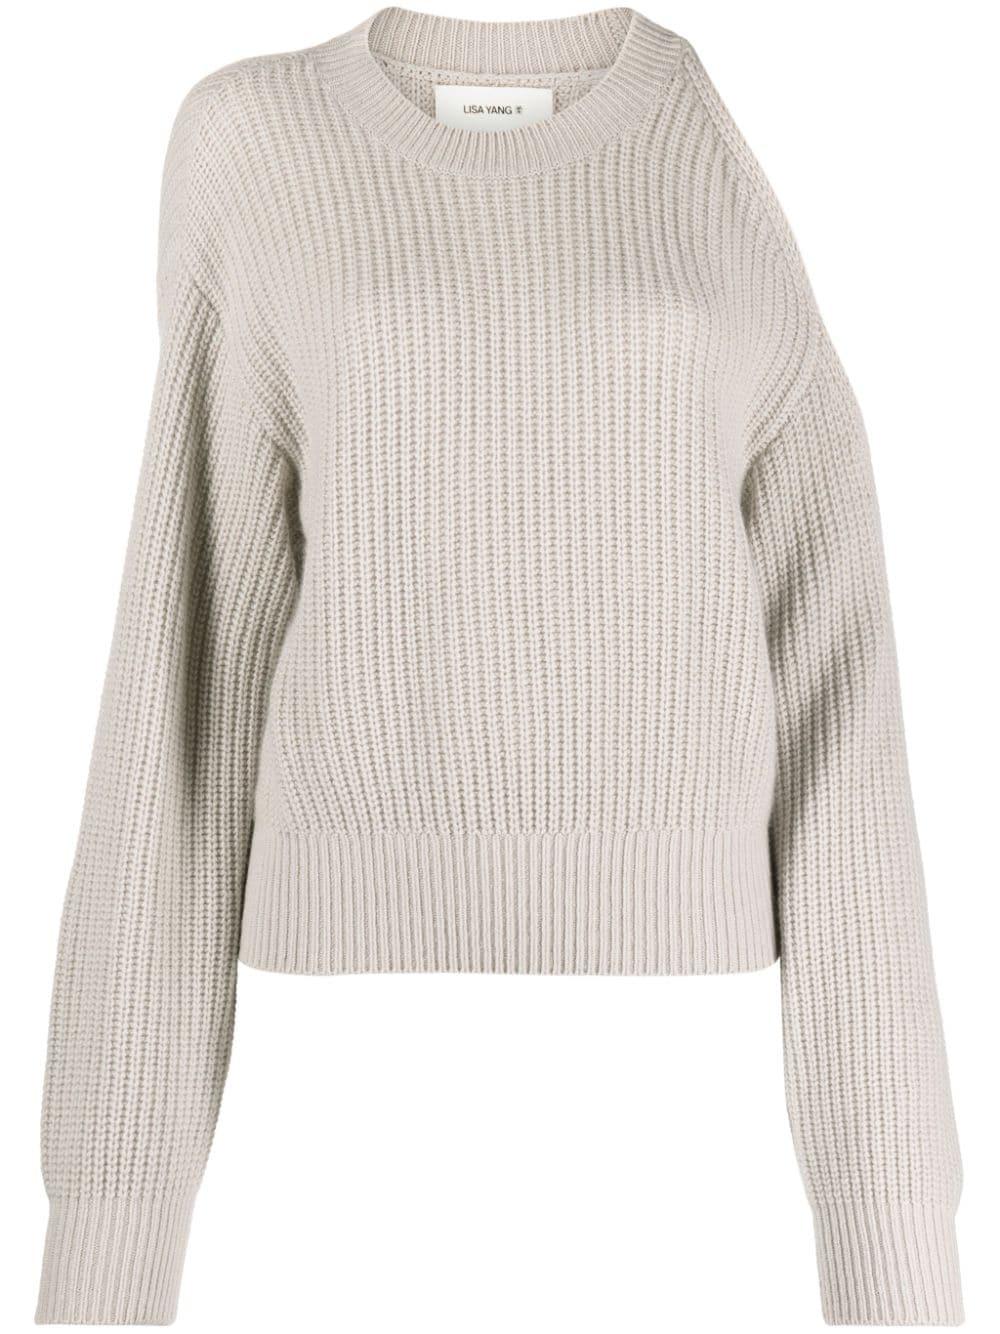 Lisa Yang Leora Cut-out Cashmere Sweater in White | Lyst